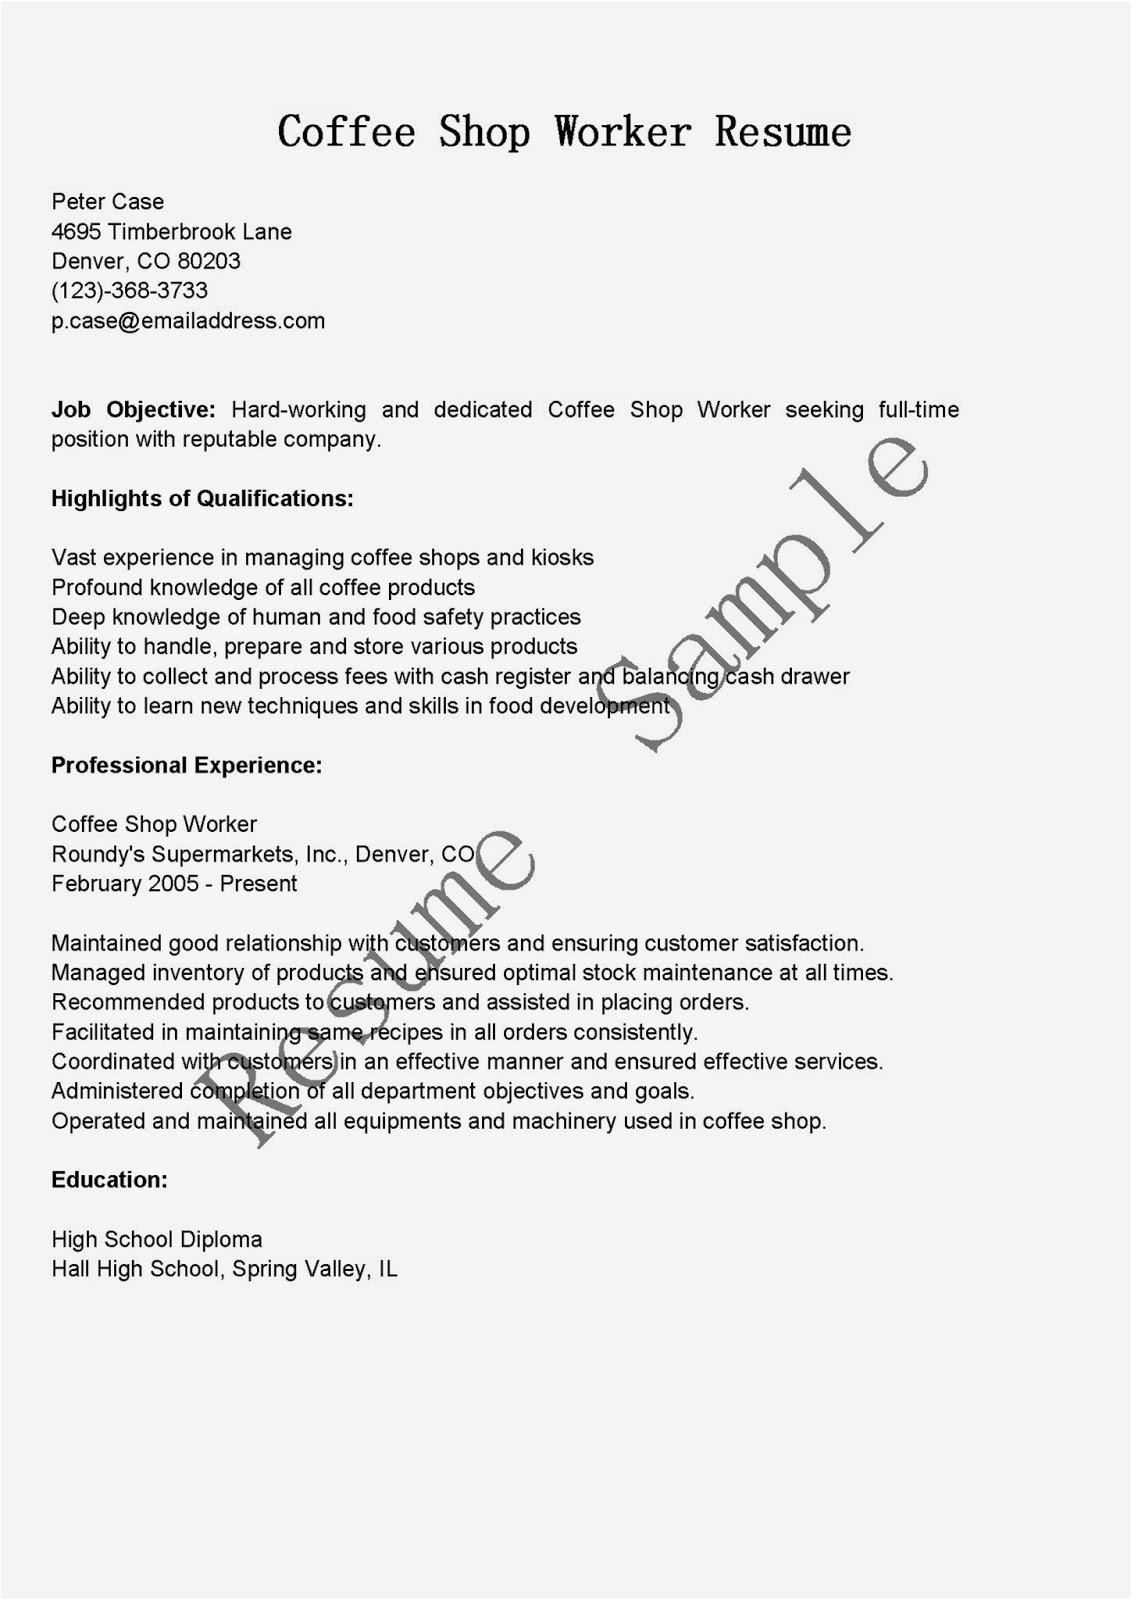 Sample Resume for Coffee Shop Worker Resume Samples Coffee Shop Worker Resume Sample